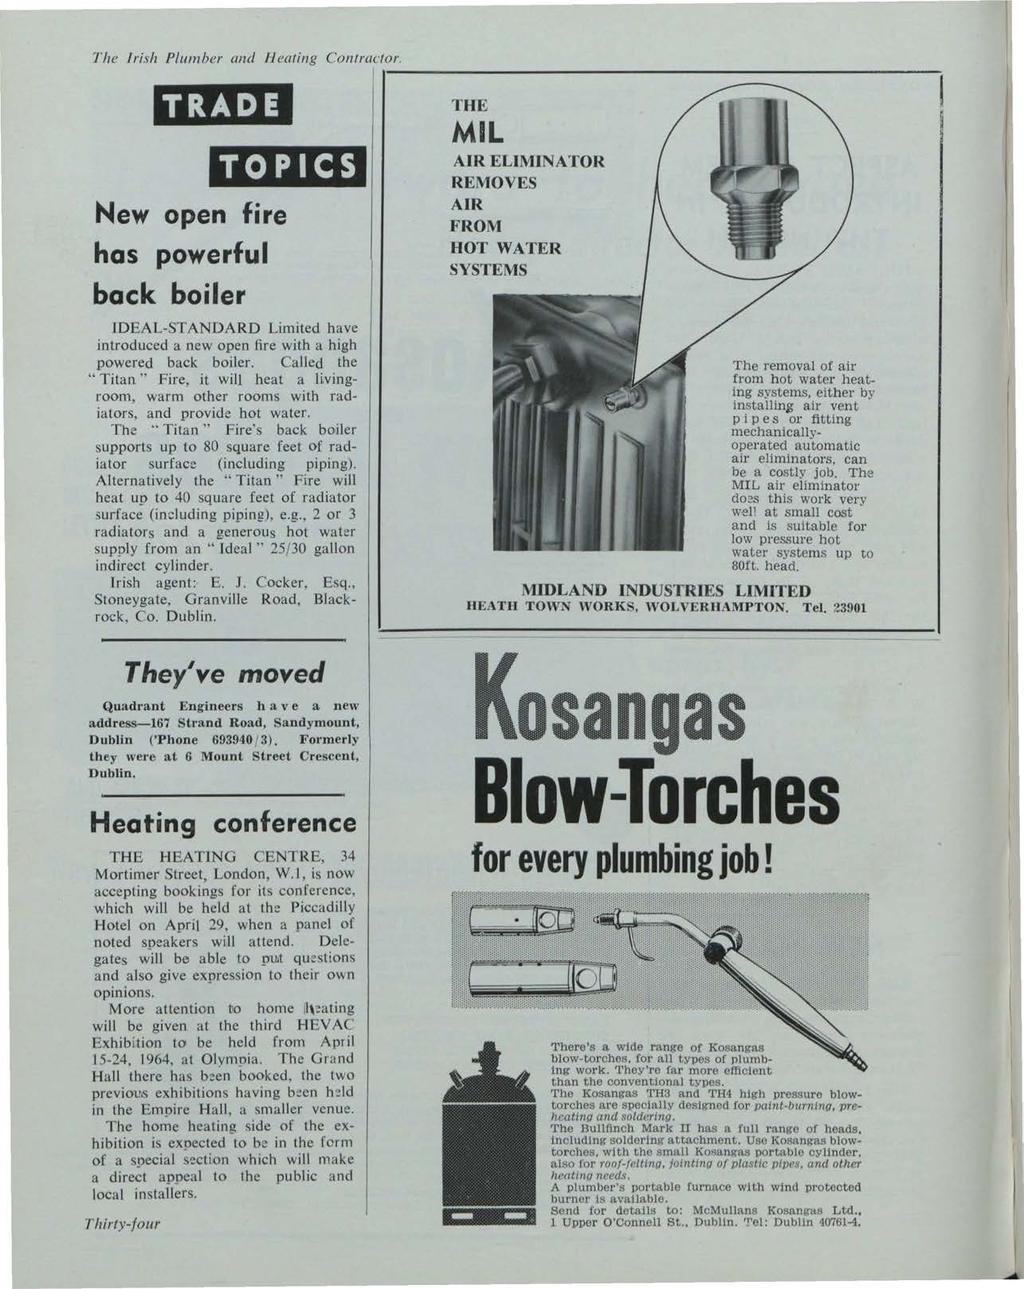 Building Services News, Vol. 2, Iss. 12 [1963], Art. 1 The Irish Plumber and Jfealing Contractor.